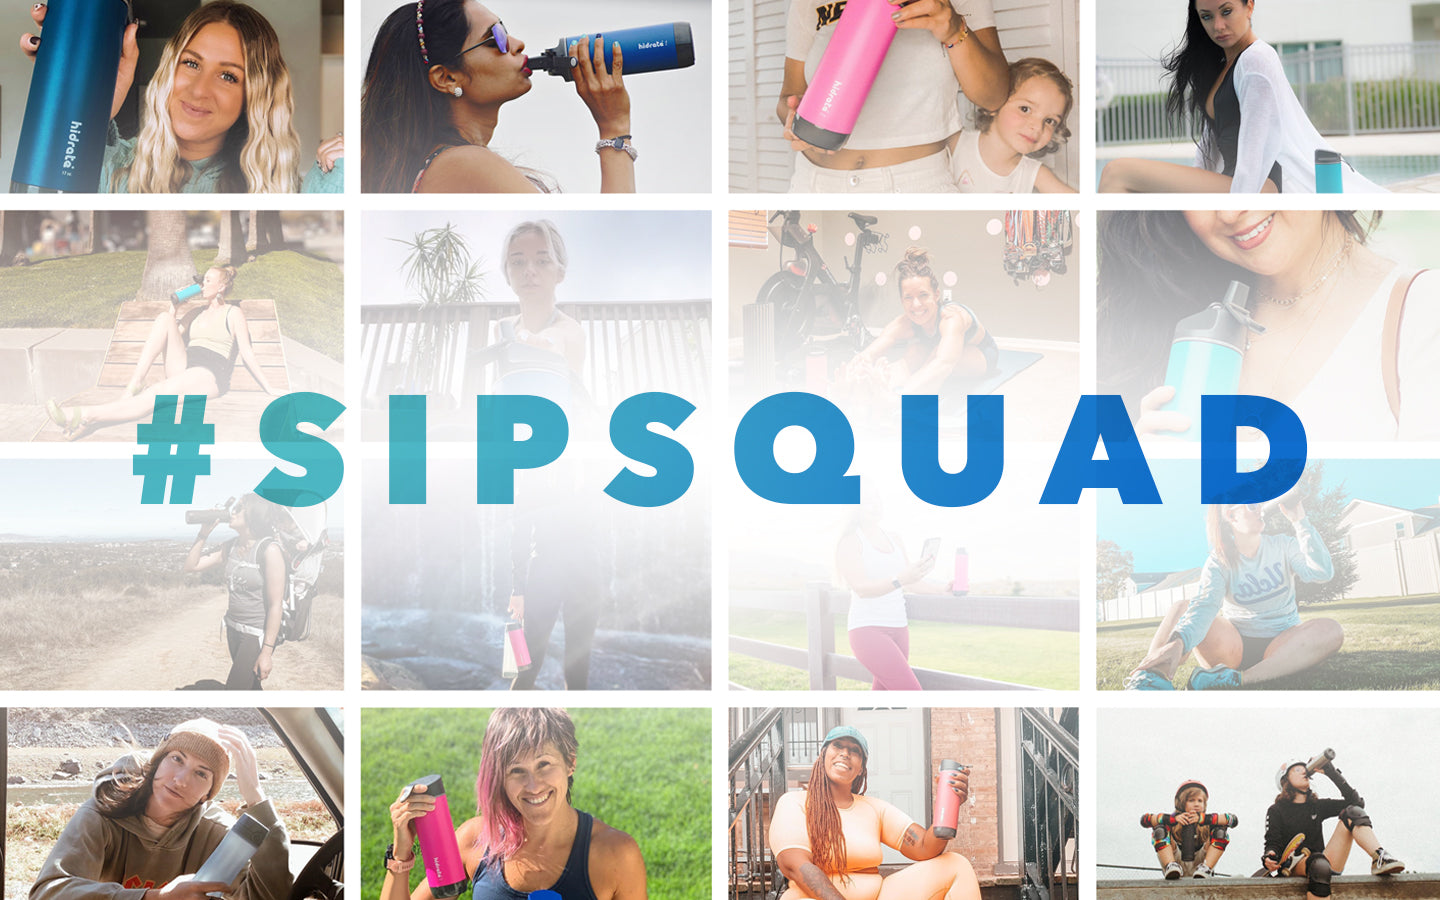 Are you on the #sipsquad?